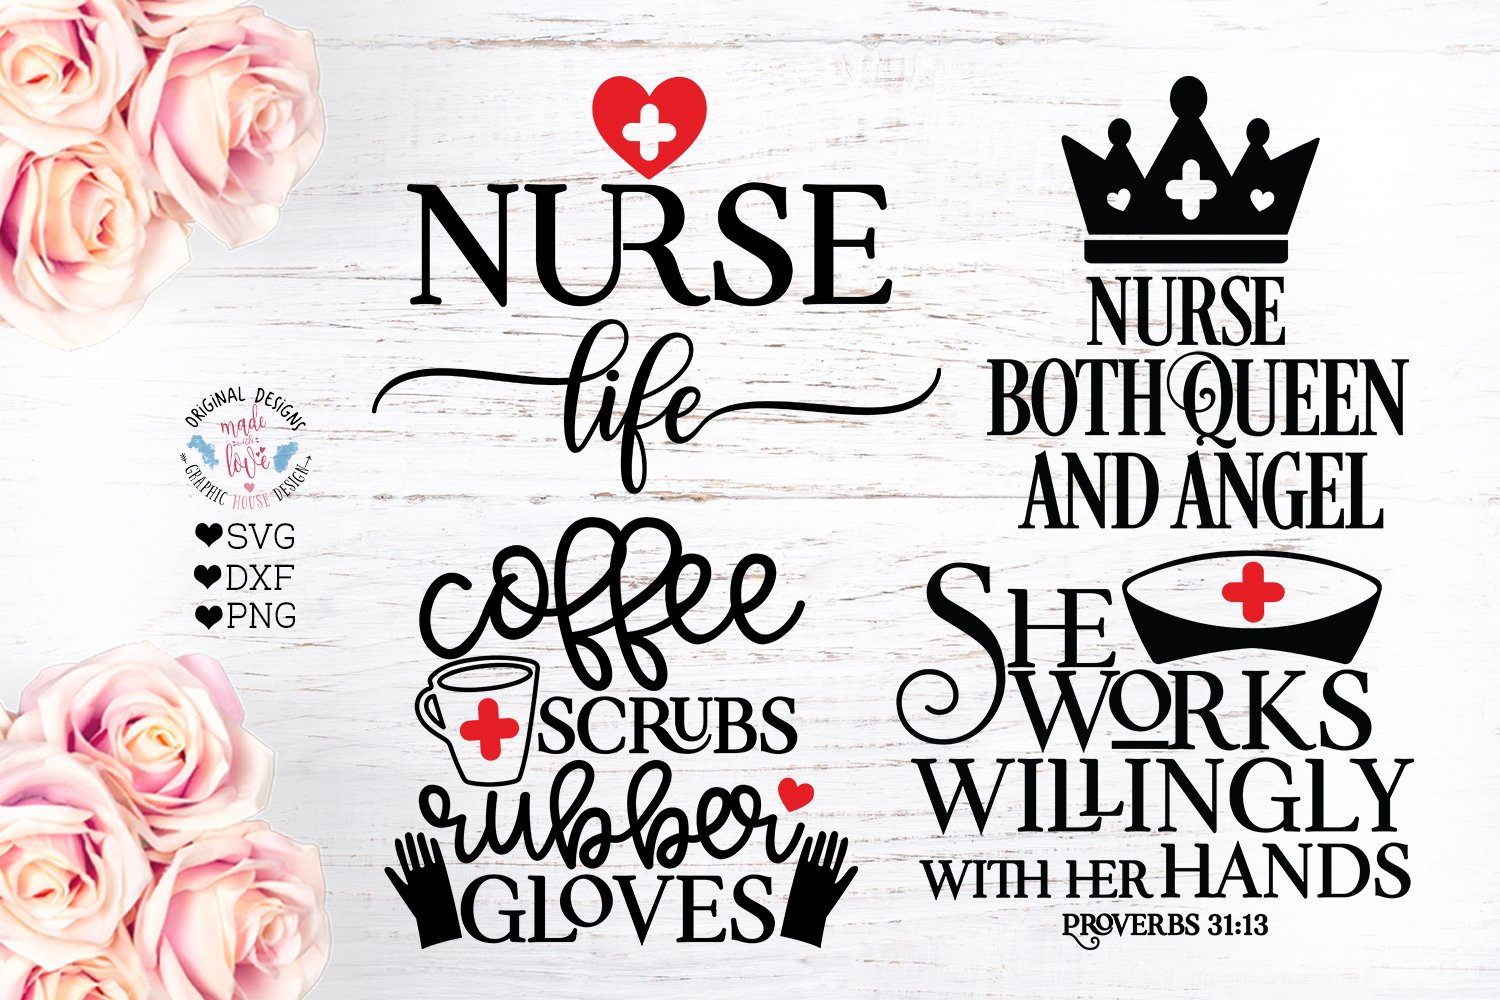 Use Nursing Quotes for different purposes.